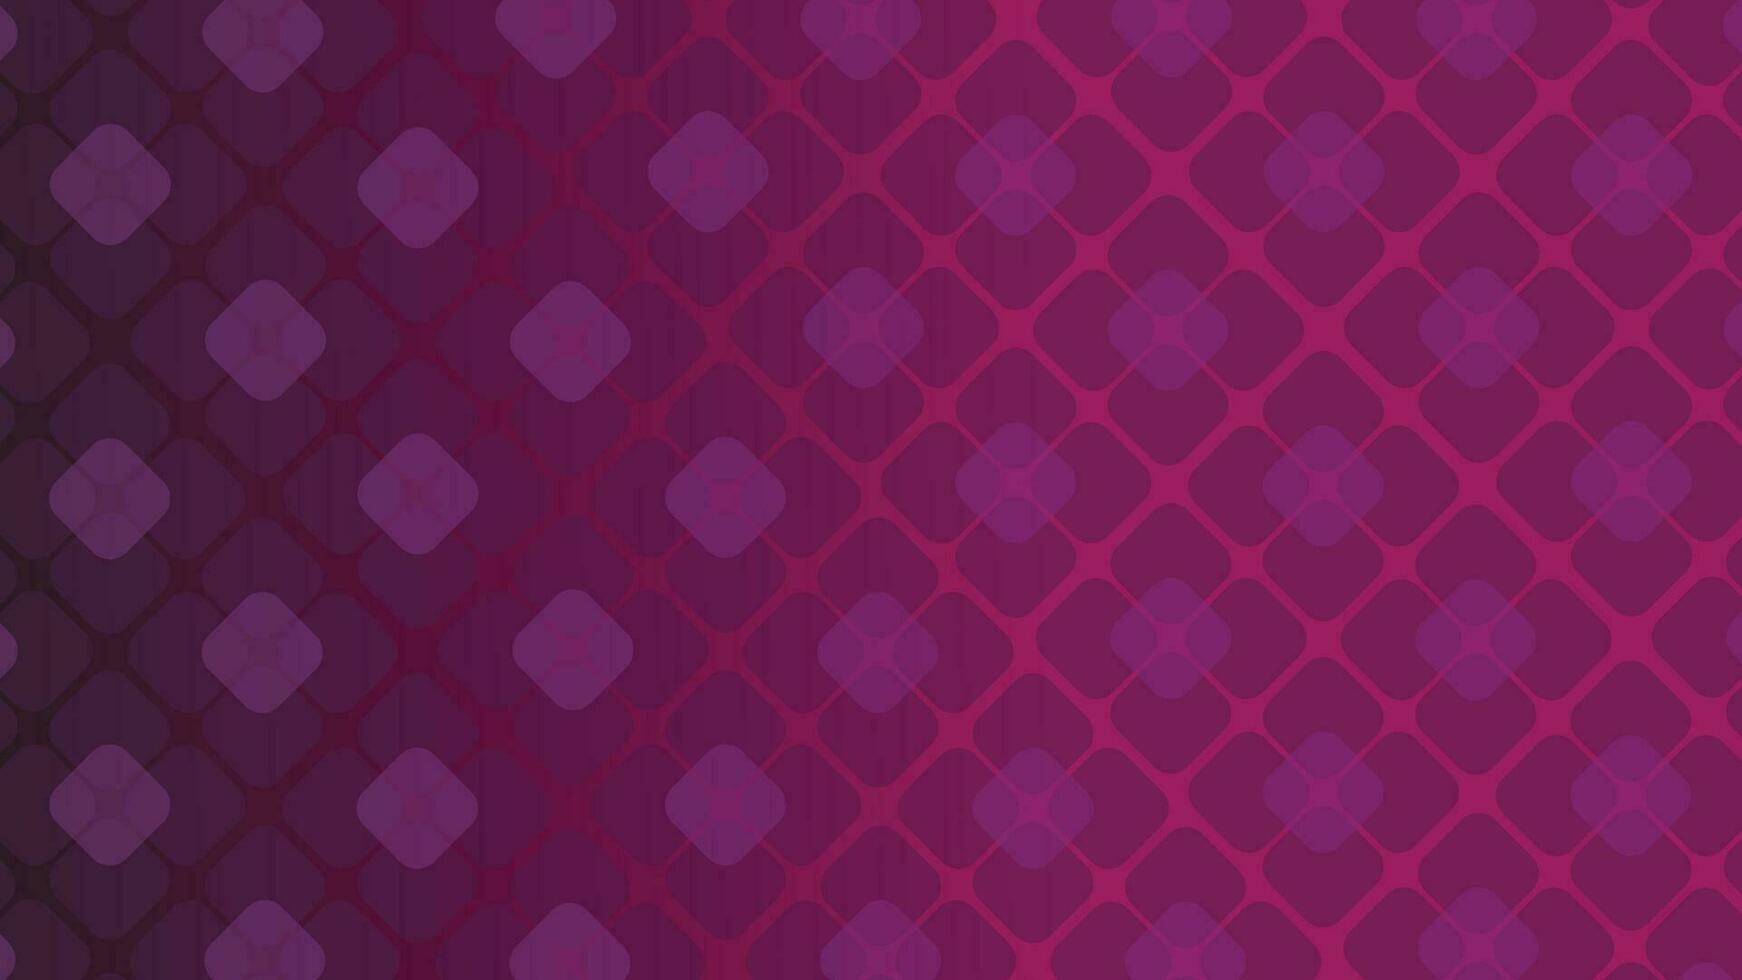 Abstract purple color pattern colorful background for your creative project. You can use it as a banner or any kind of content creation. vector